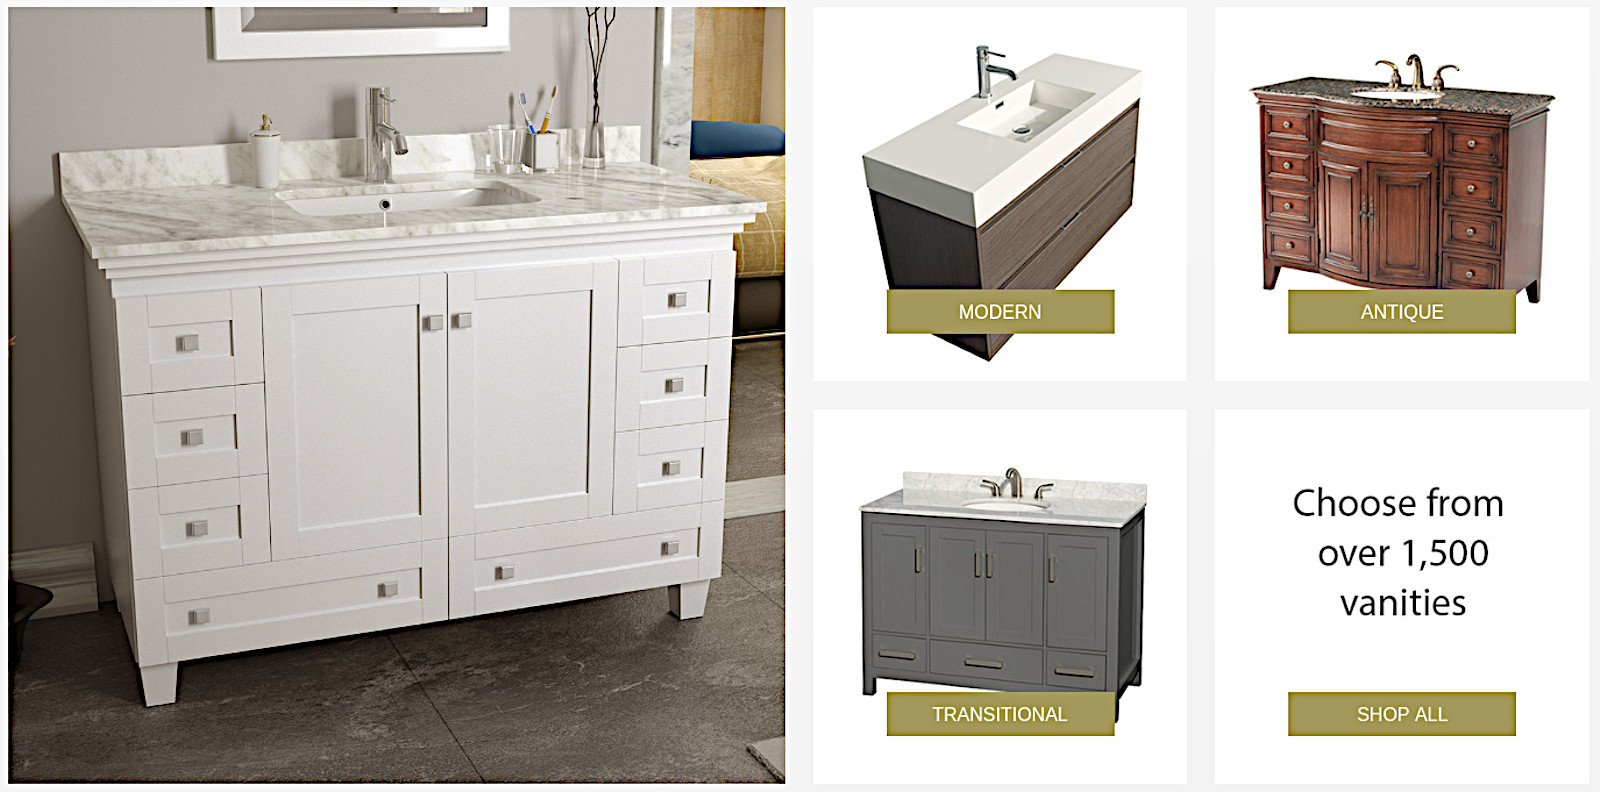 At A Reduced Price modern antique transitional vanities